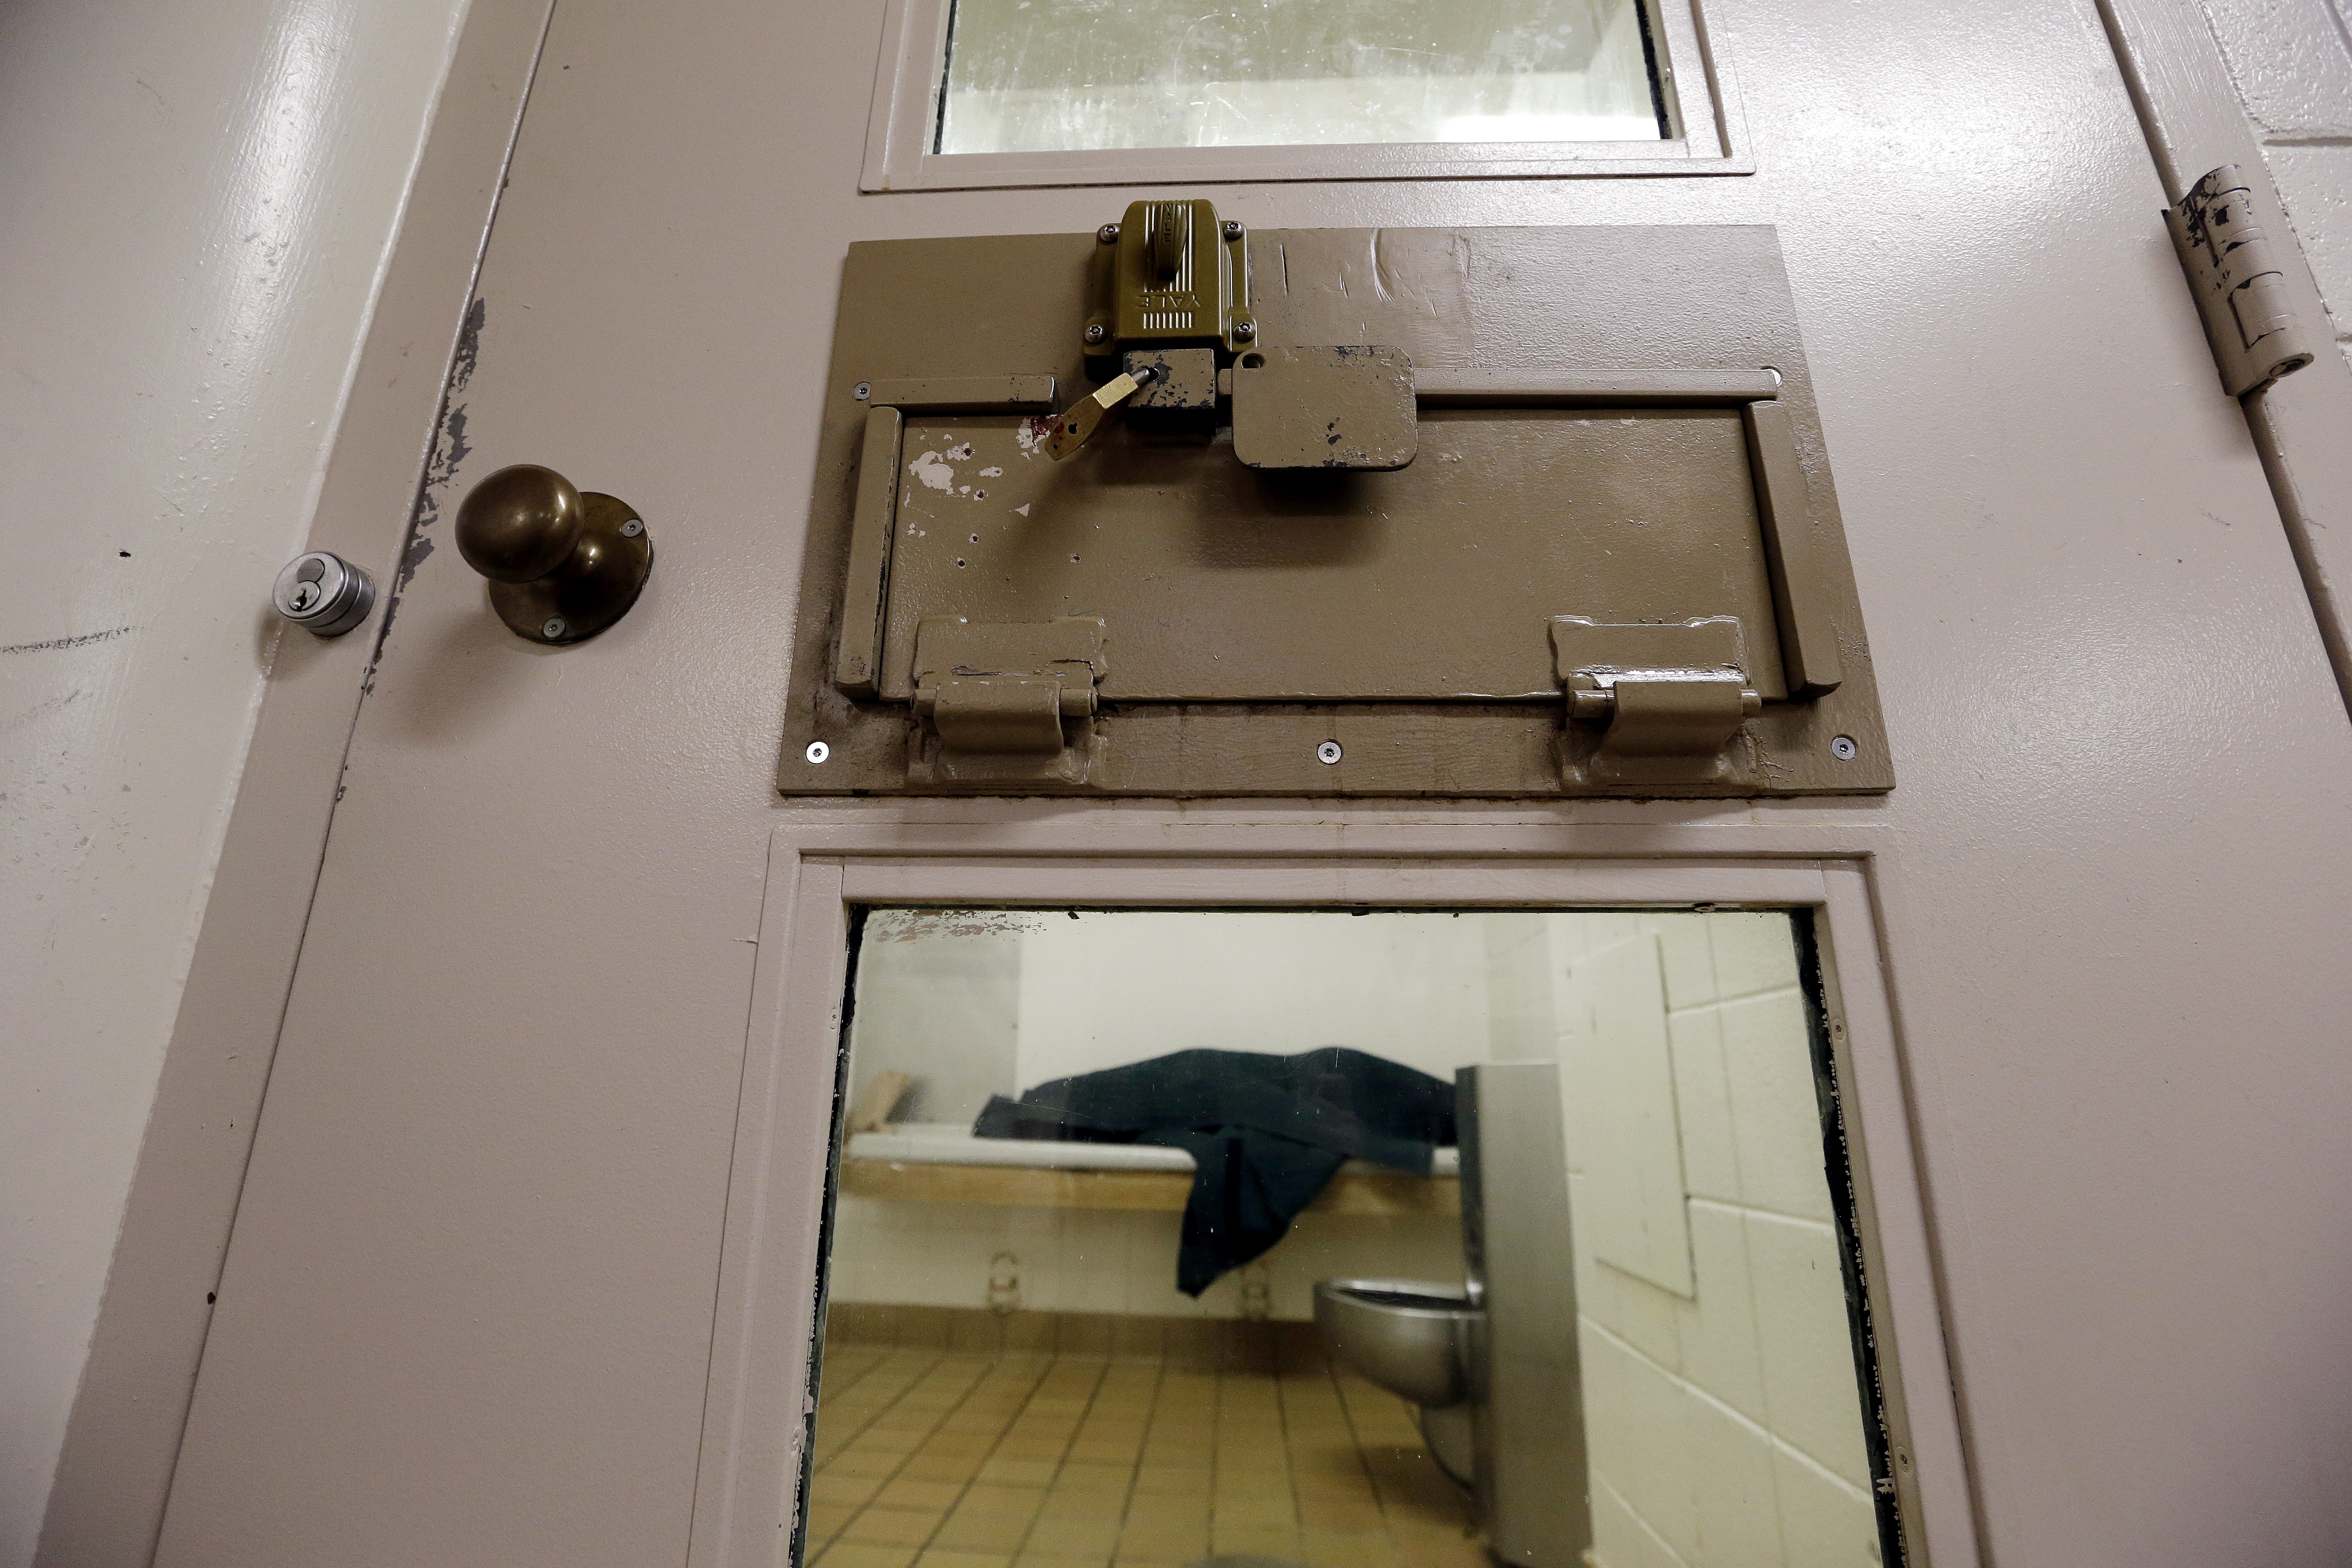 An inmate lies on a jail bed covering themself with a dark blue blanket.